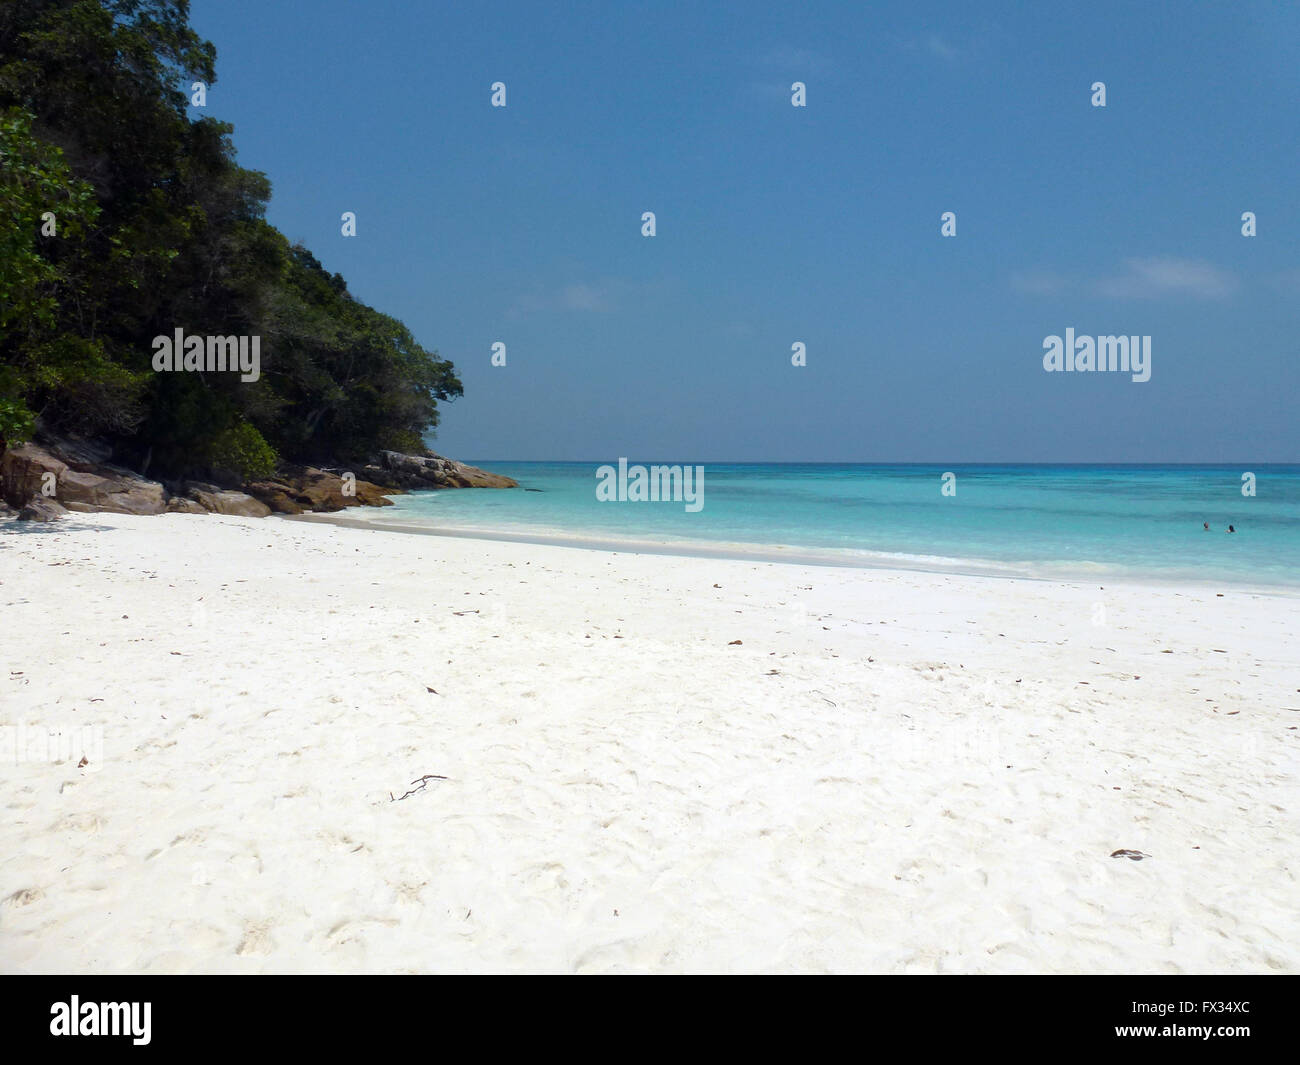 The empty beach on Koh Tachai island, Thailand, 15 March 2016. Koh Tachai is located outside of the actual Similan Islands and is the northernmost part of the national park of the same name. Photo: ALEXANDRA SCHULER/dpa - NO WIRE SERVICE - Stock Photo